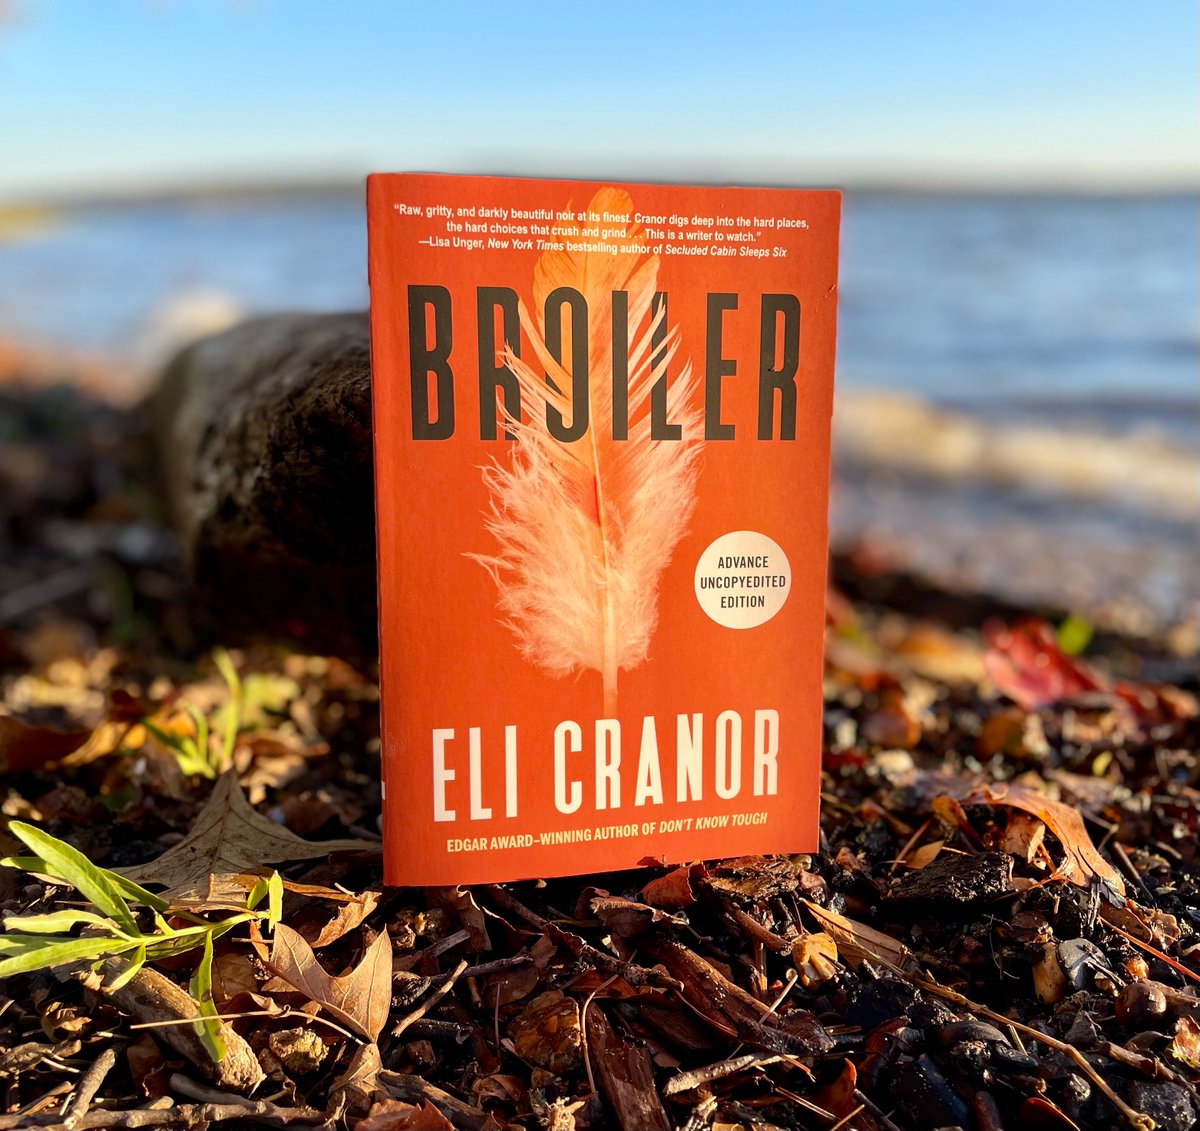 BROILER galleys landed at the lake🐣 The troubles of two desperate families—one white, one Mexican American—converge in the ruthless underworld of an Arkansas chicken processing plant. Preorder here (if u want): penguinrandomhouse.com/books/743692/b…